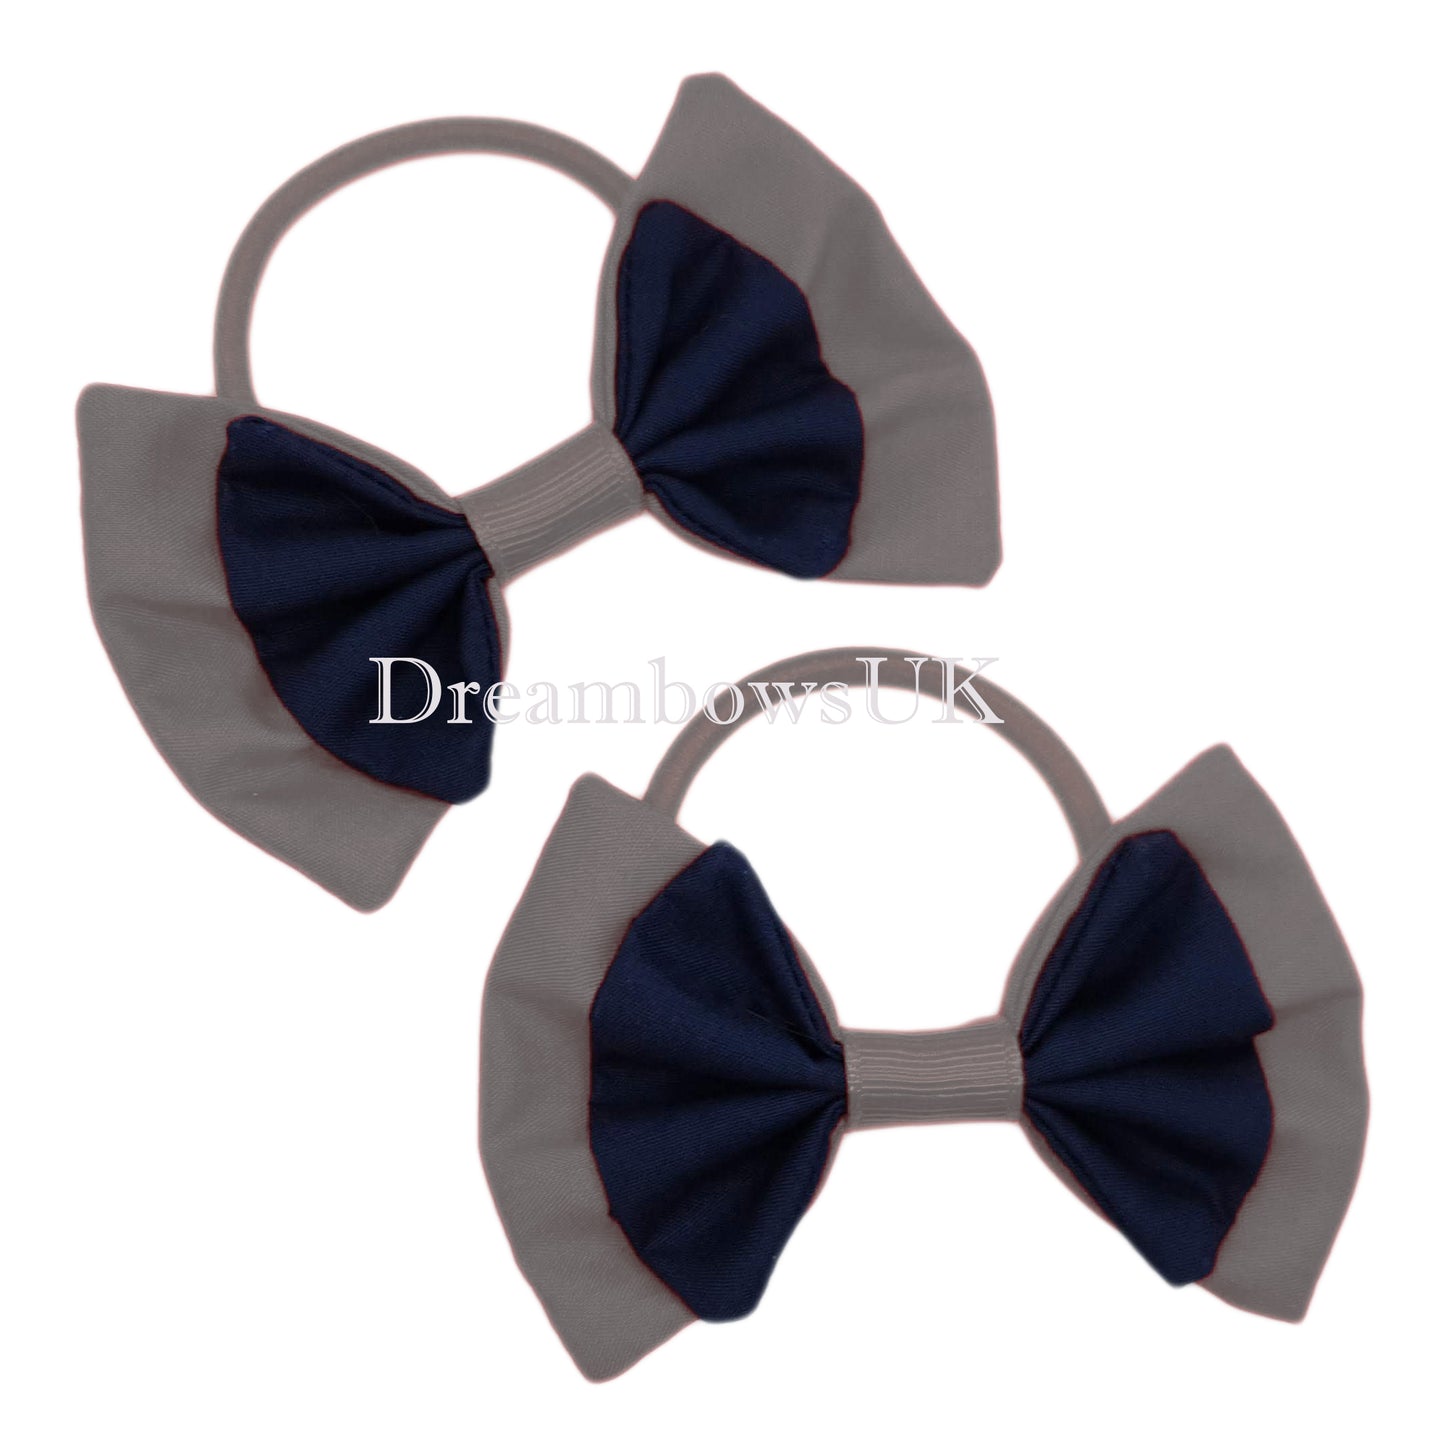 2x Navy blue and grey fabric hair bows